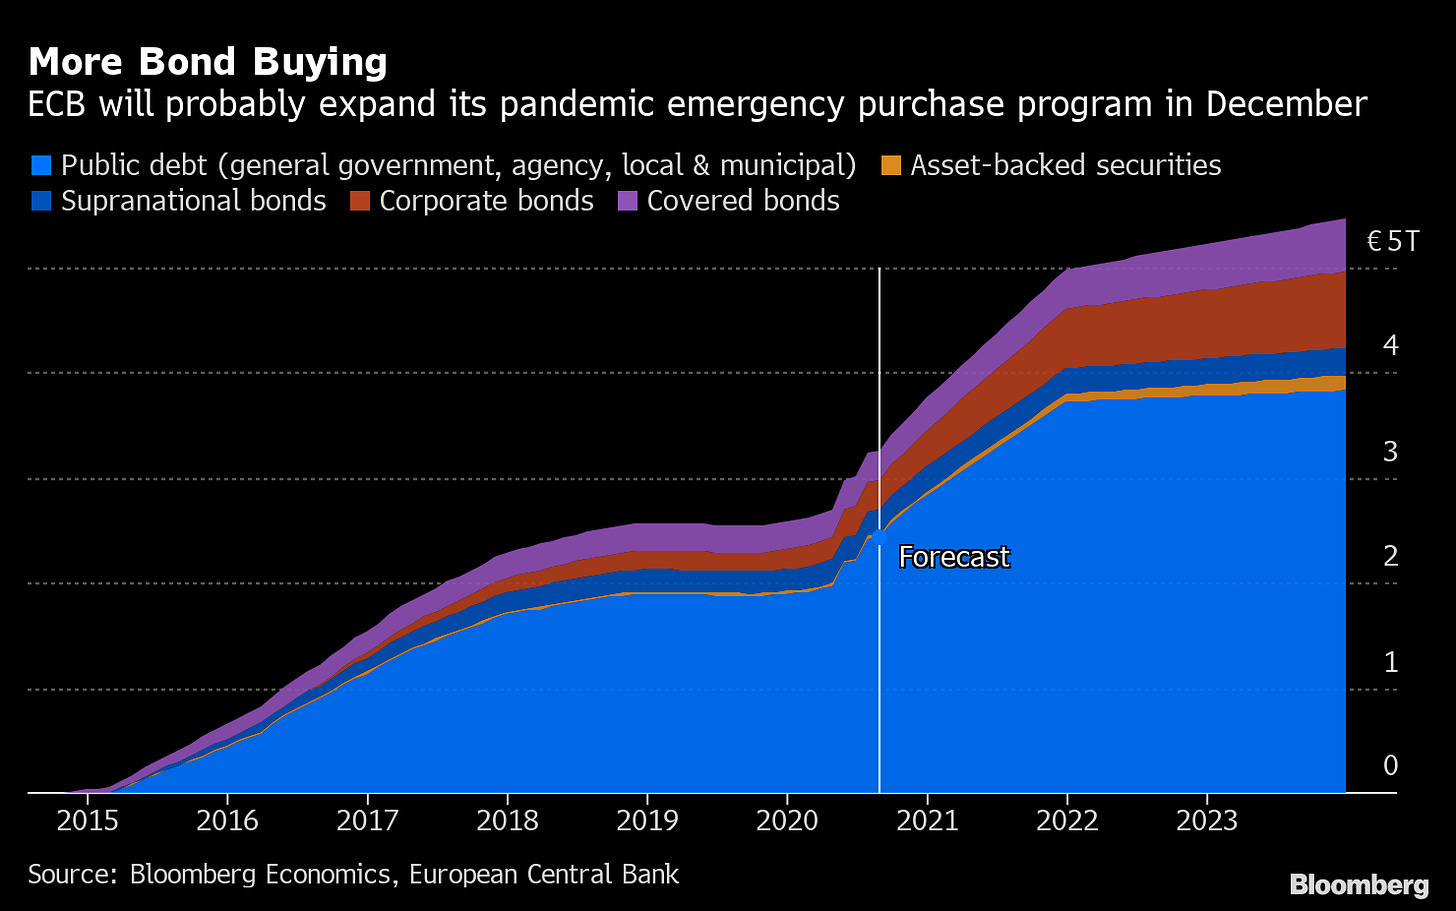 Covid Cases Surge, ECB Asset Purchases Will Follow: Chart - Bloomberg